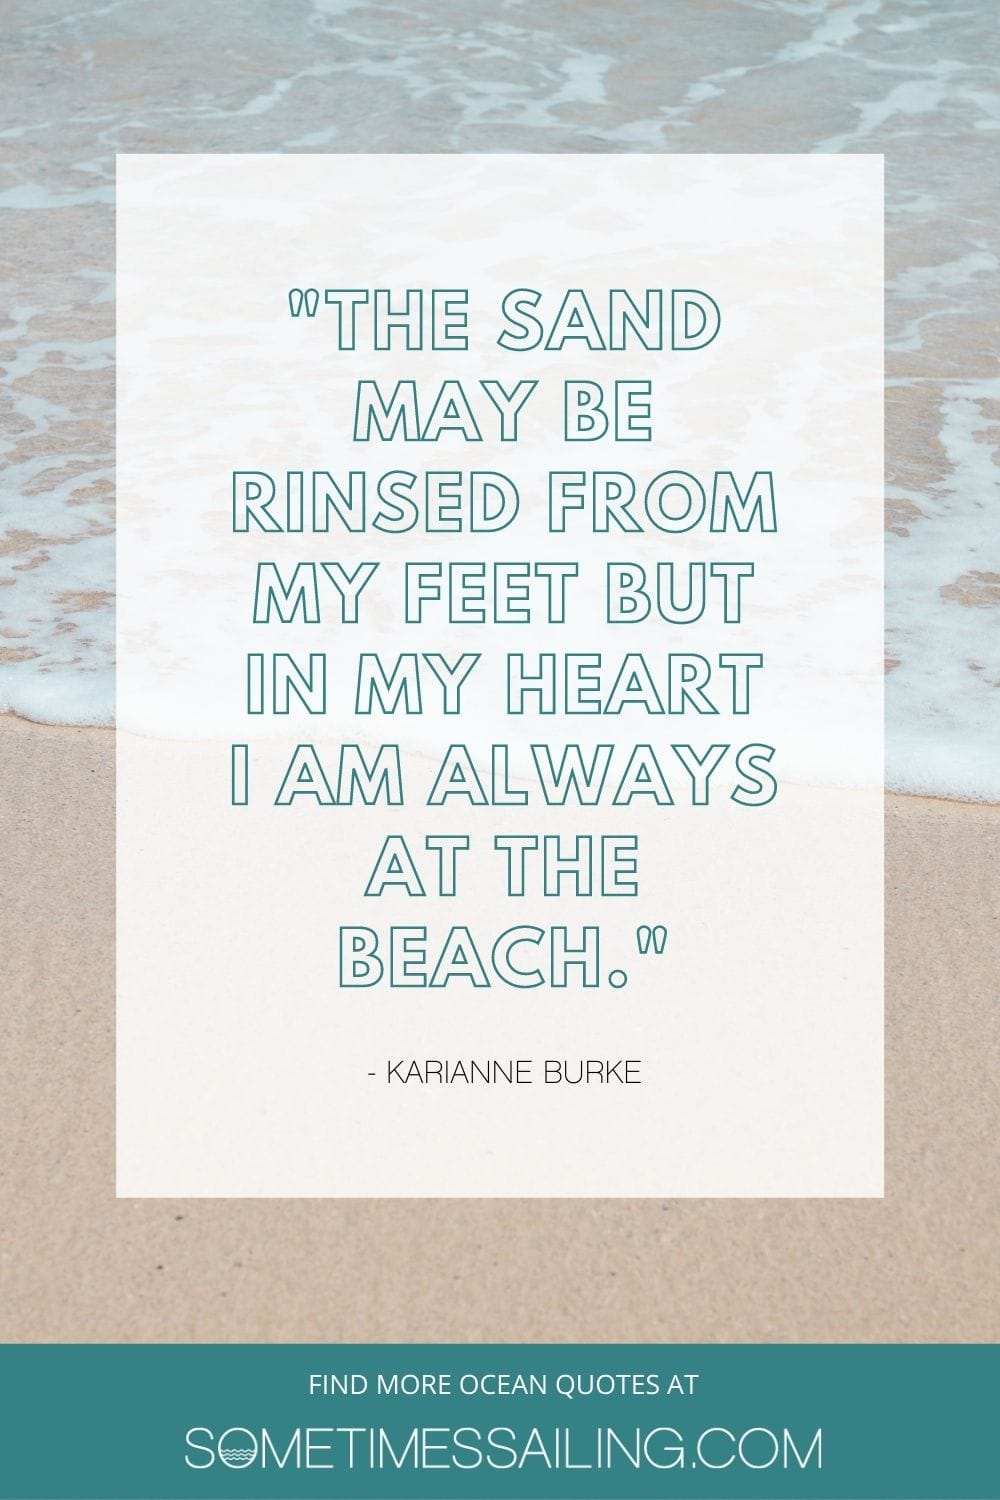 Inspirational ocean quote with an aerial photo of the shore and the sand and a wave behind it.